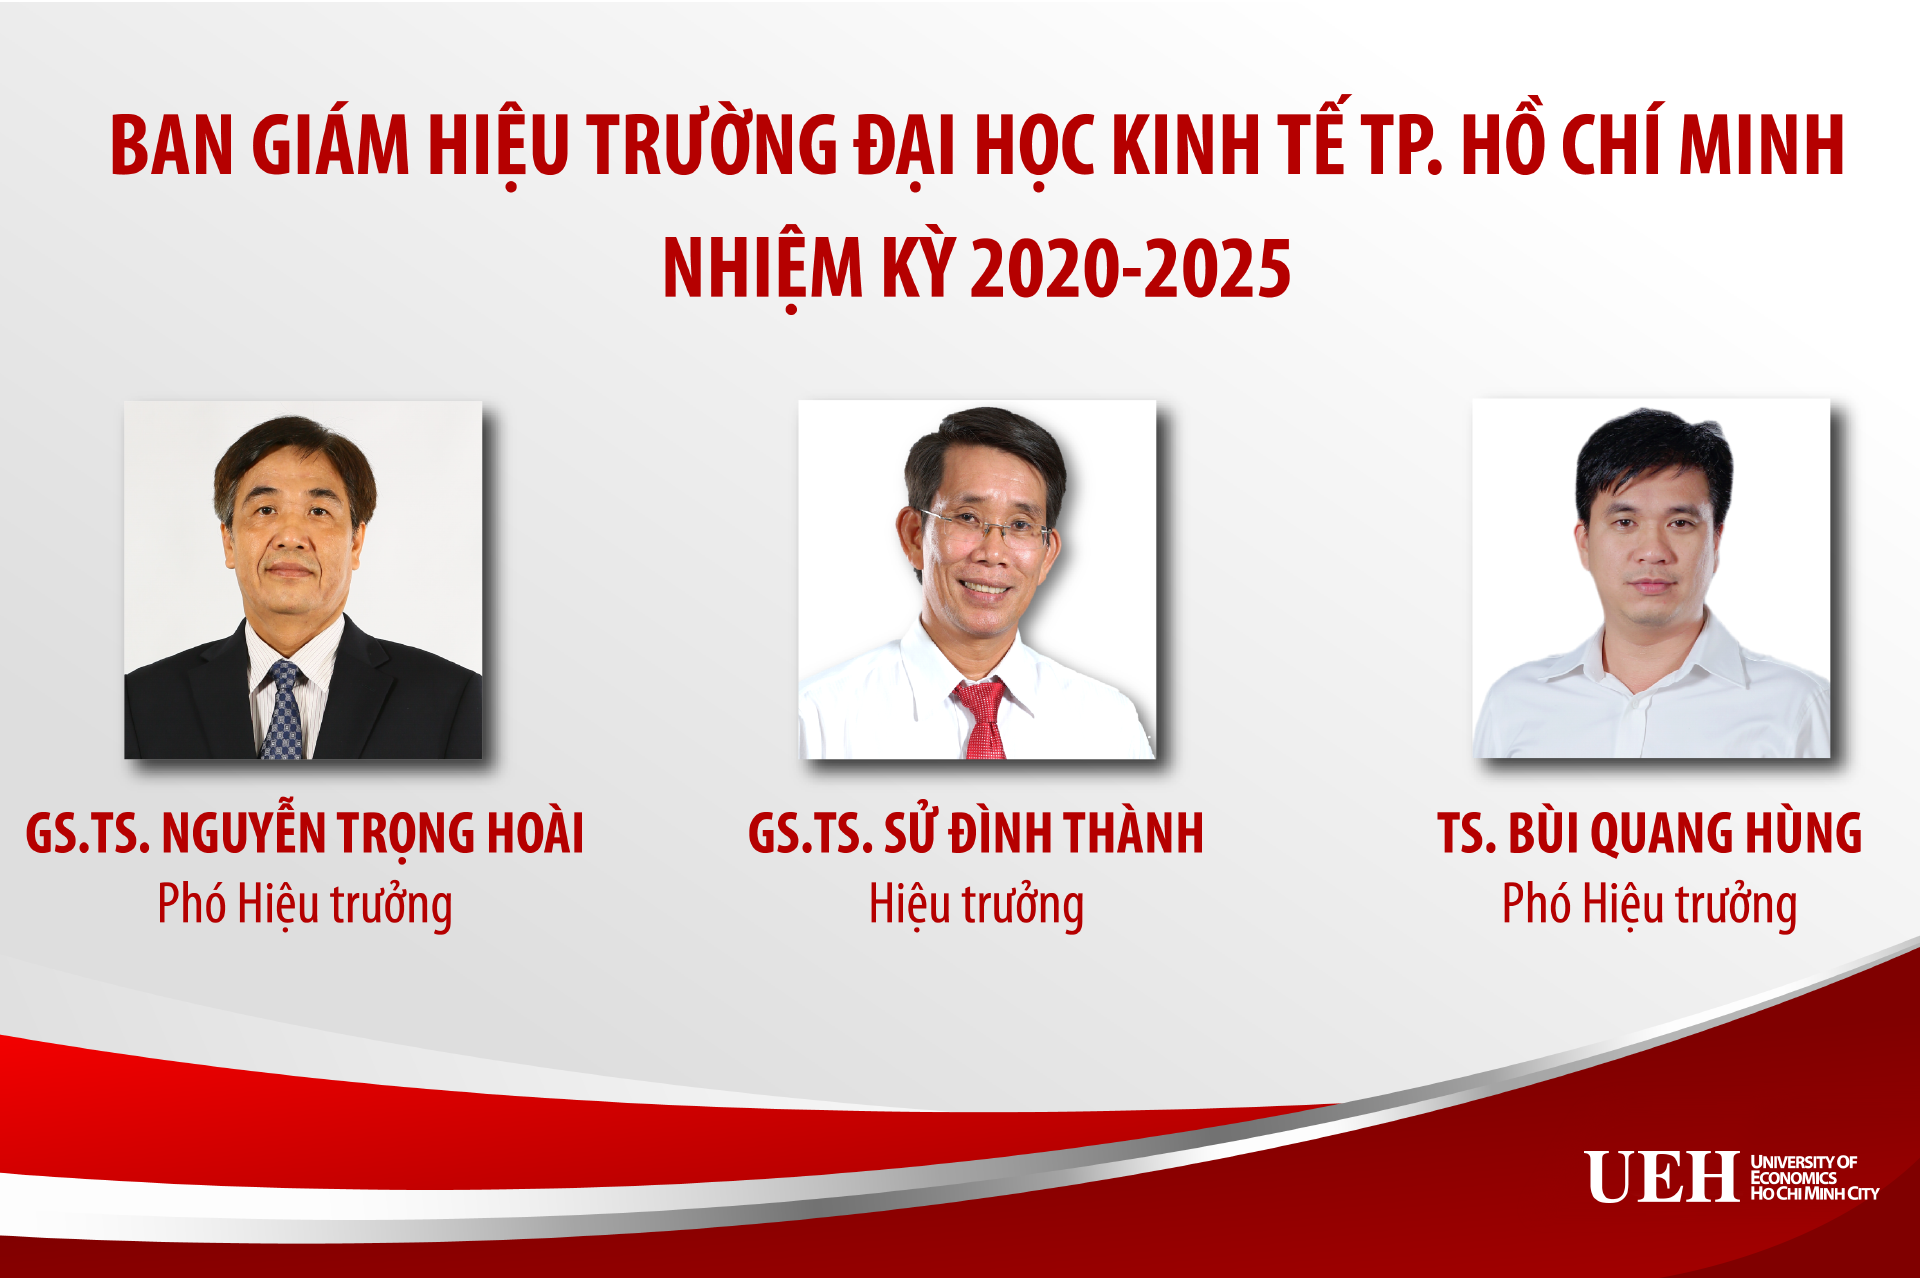 New President and Vice President appointed for University of Economics Ho Chi Minh City for the term 2020 - 2025